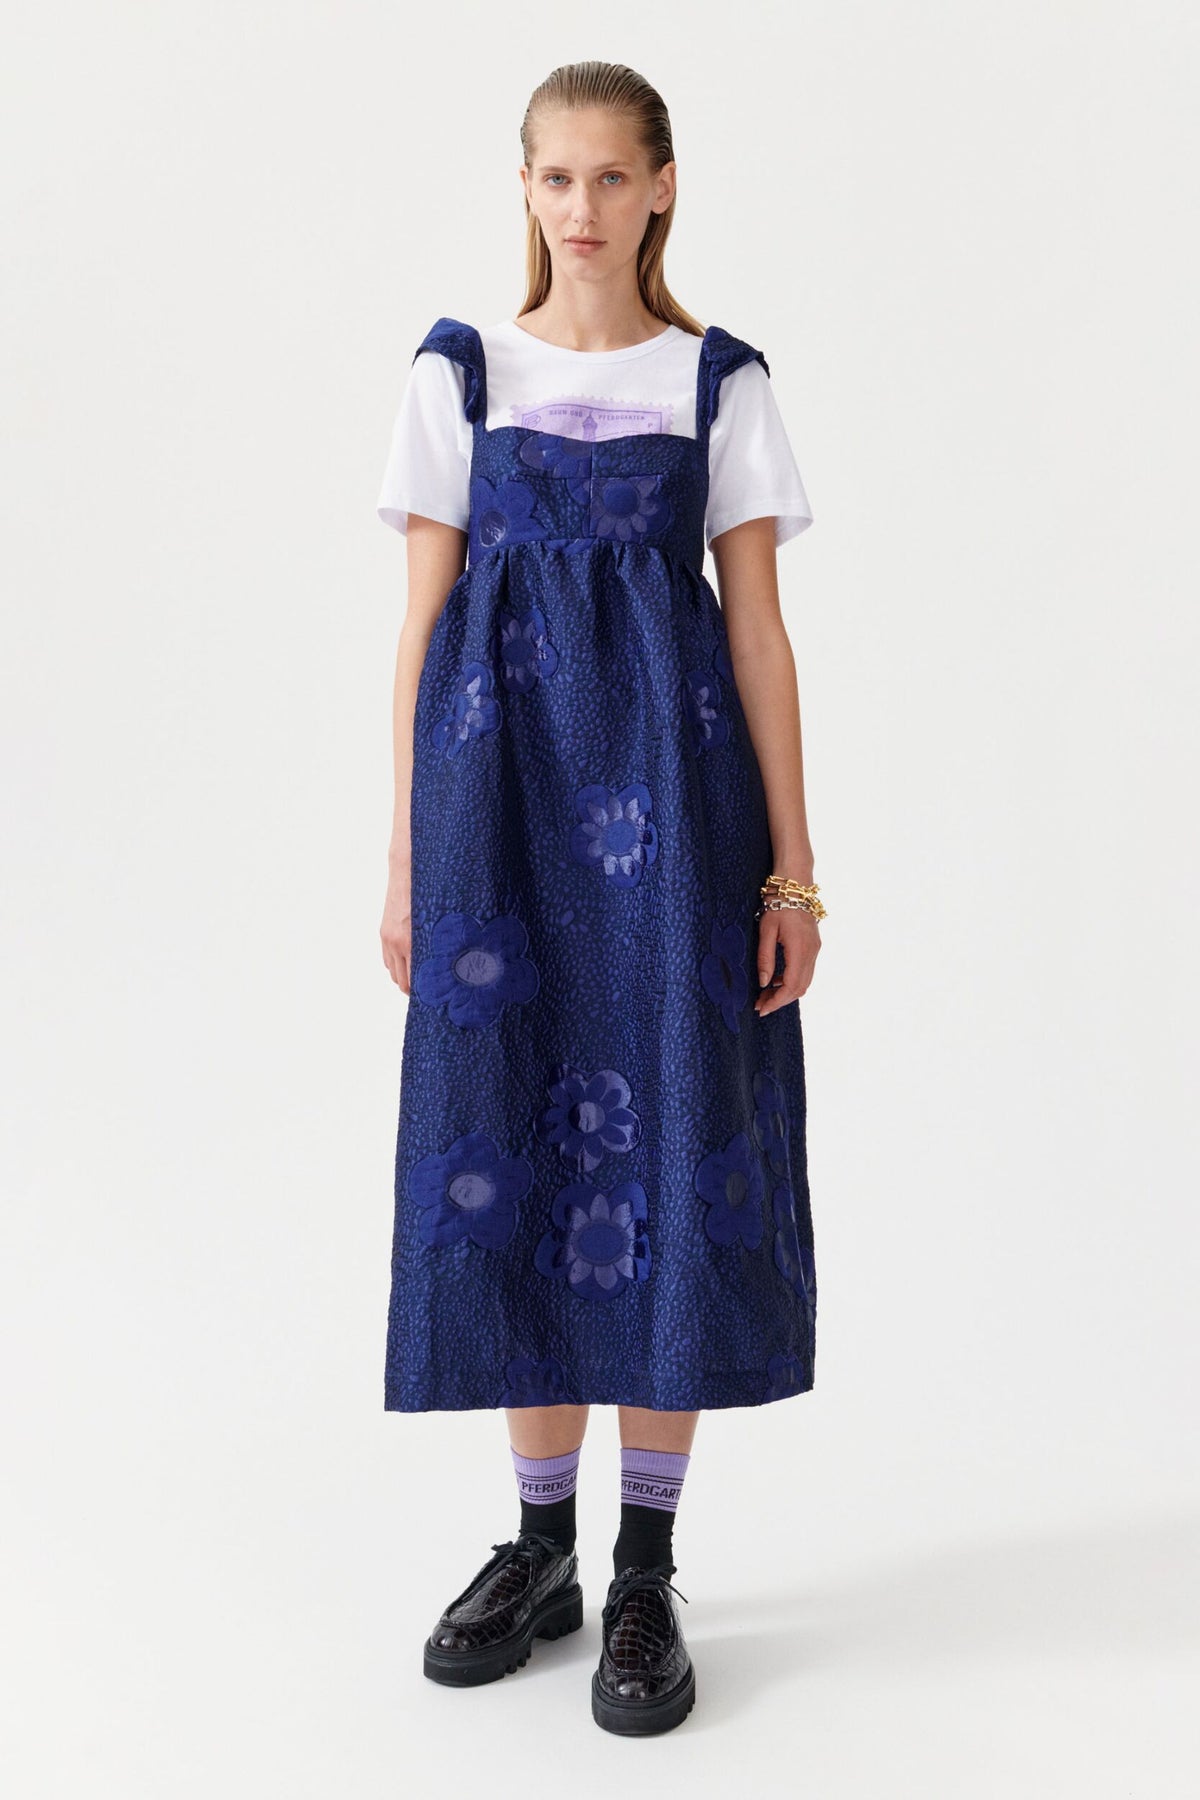 Navy thin strappy dress with empire line and blue embroidered flowers on the fabric, full skirt midi length